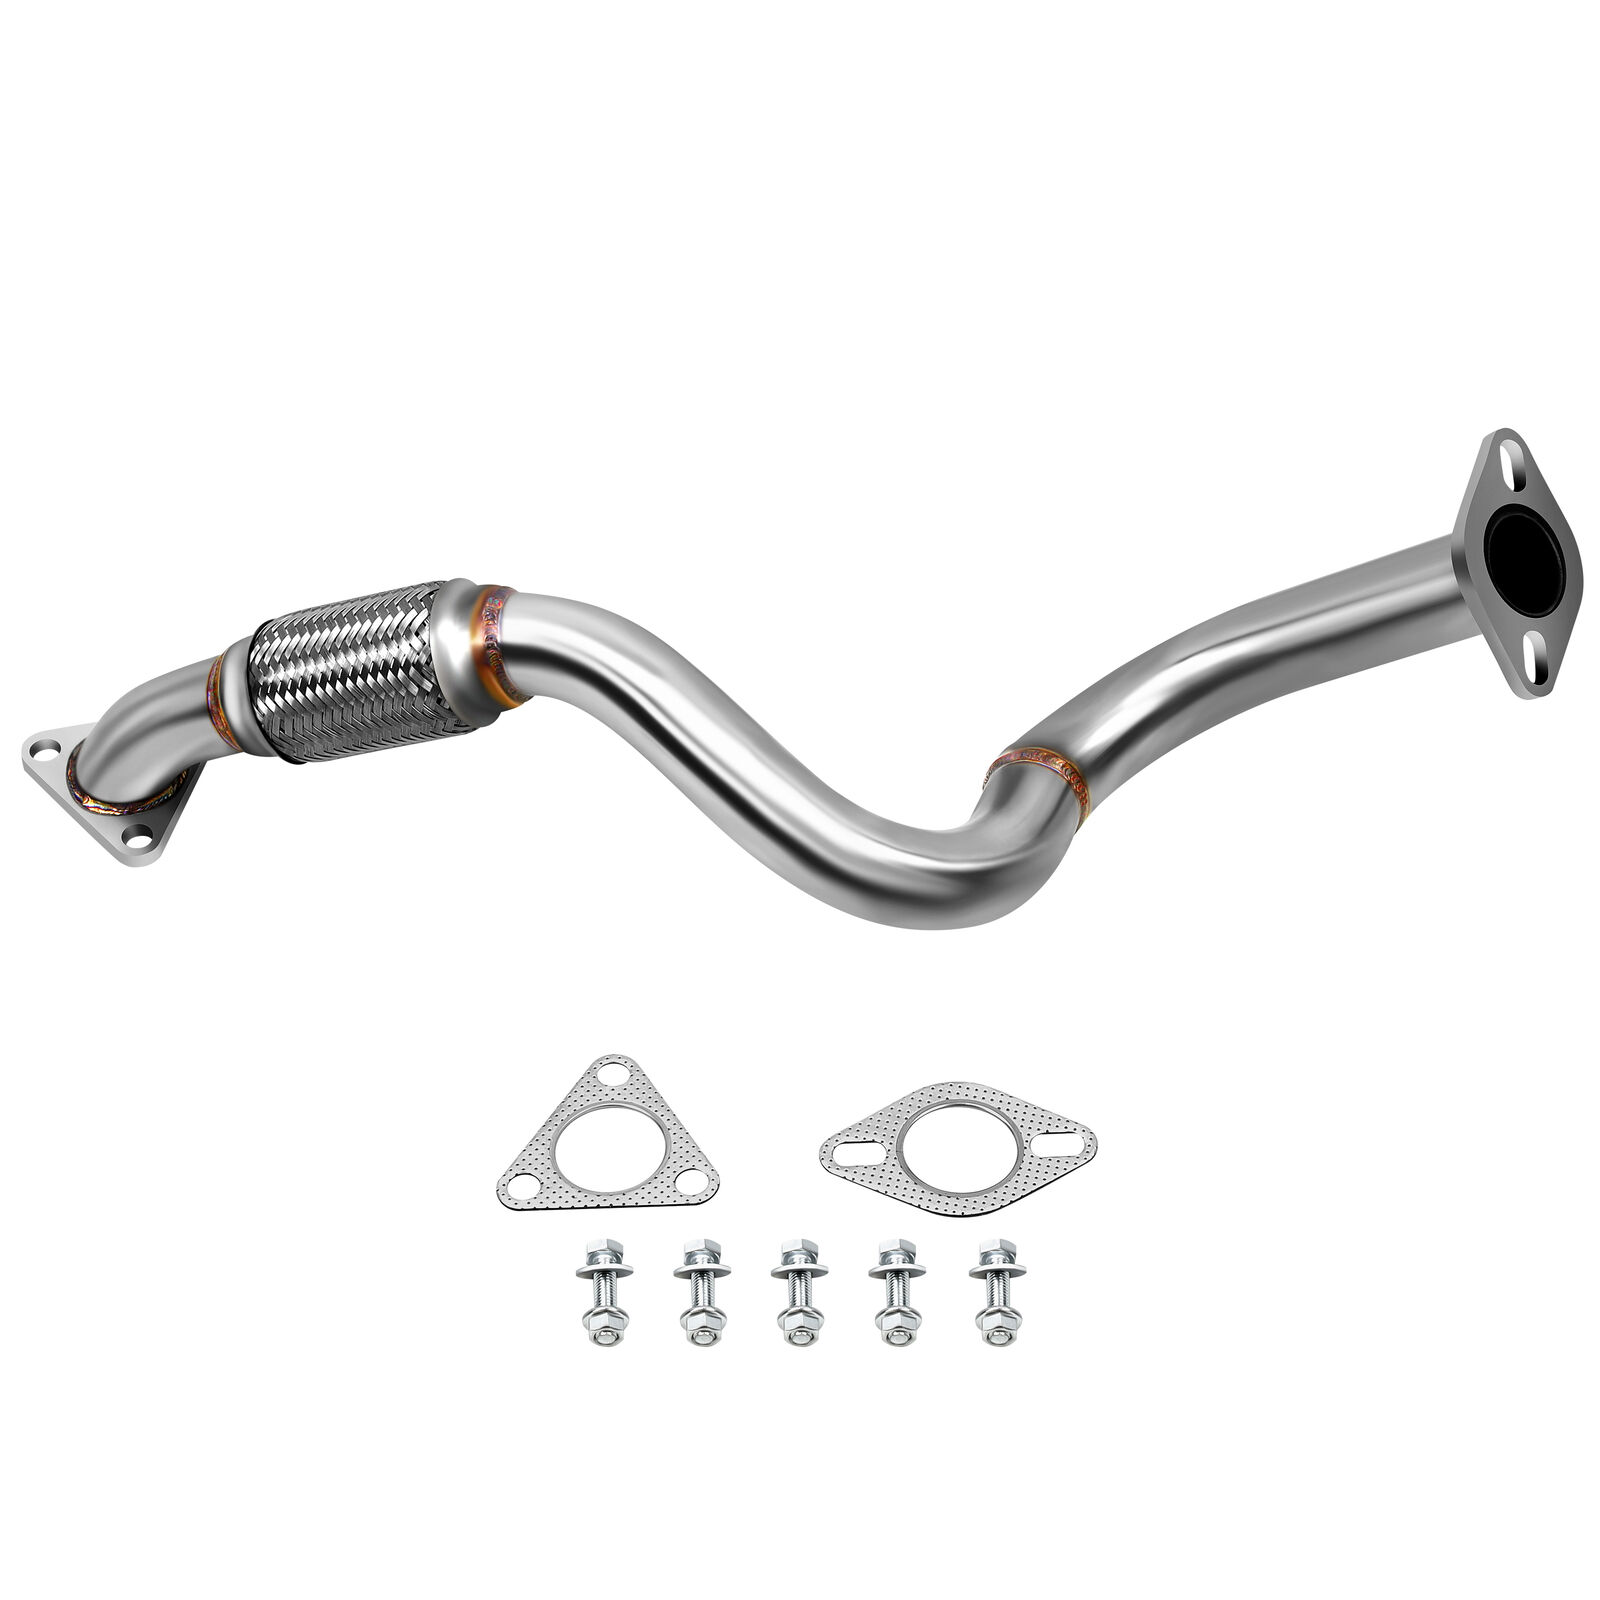 For Fits 2012-2016 CHEVROLET SONIC 1.8L 4 Cylinder Flex Pipe Stainless Steel